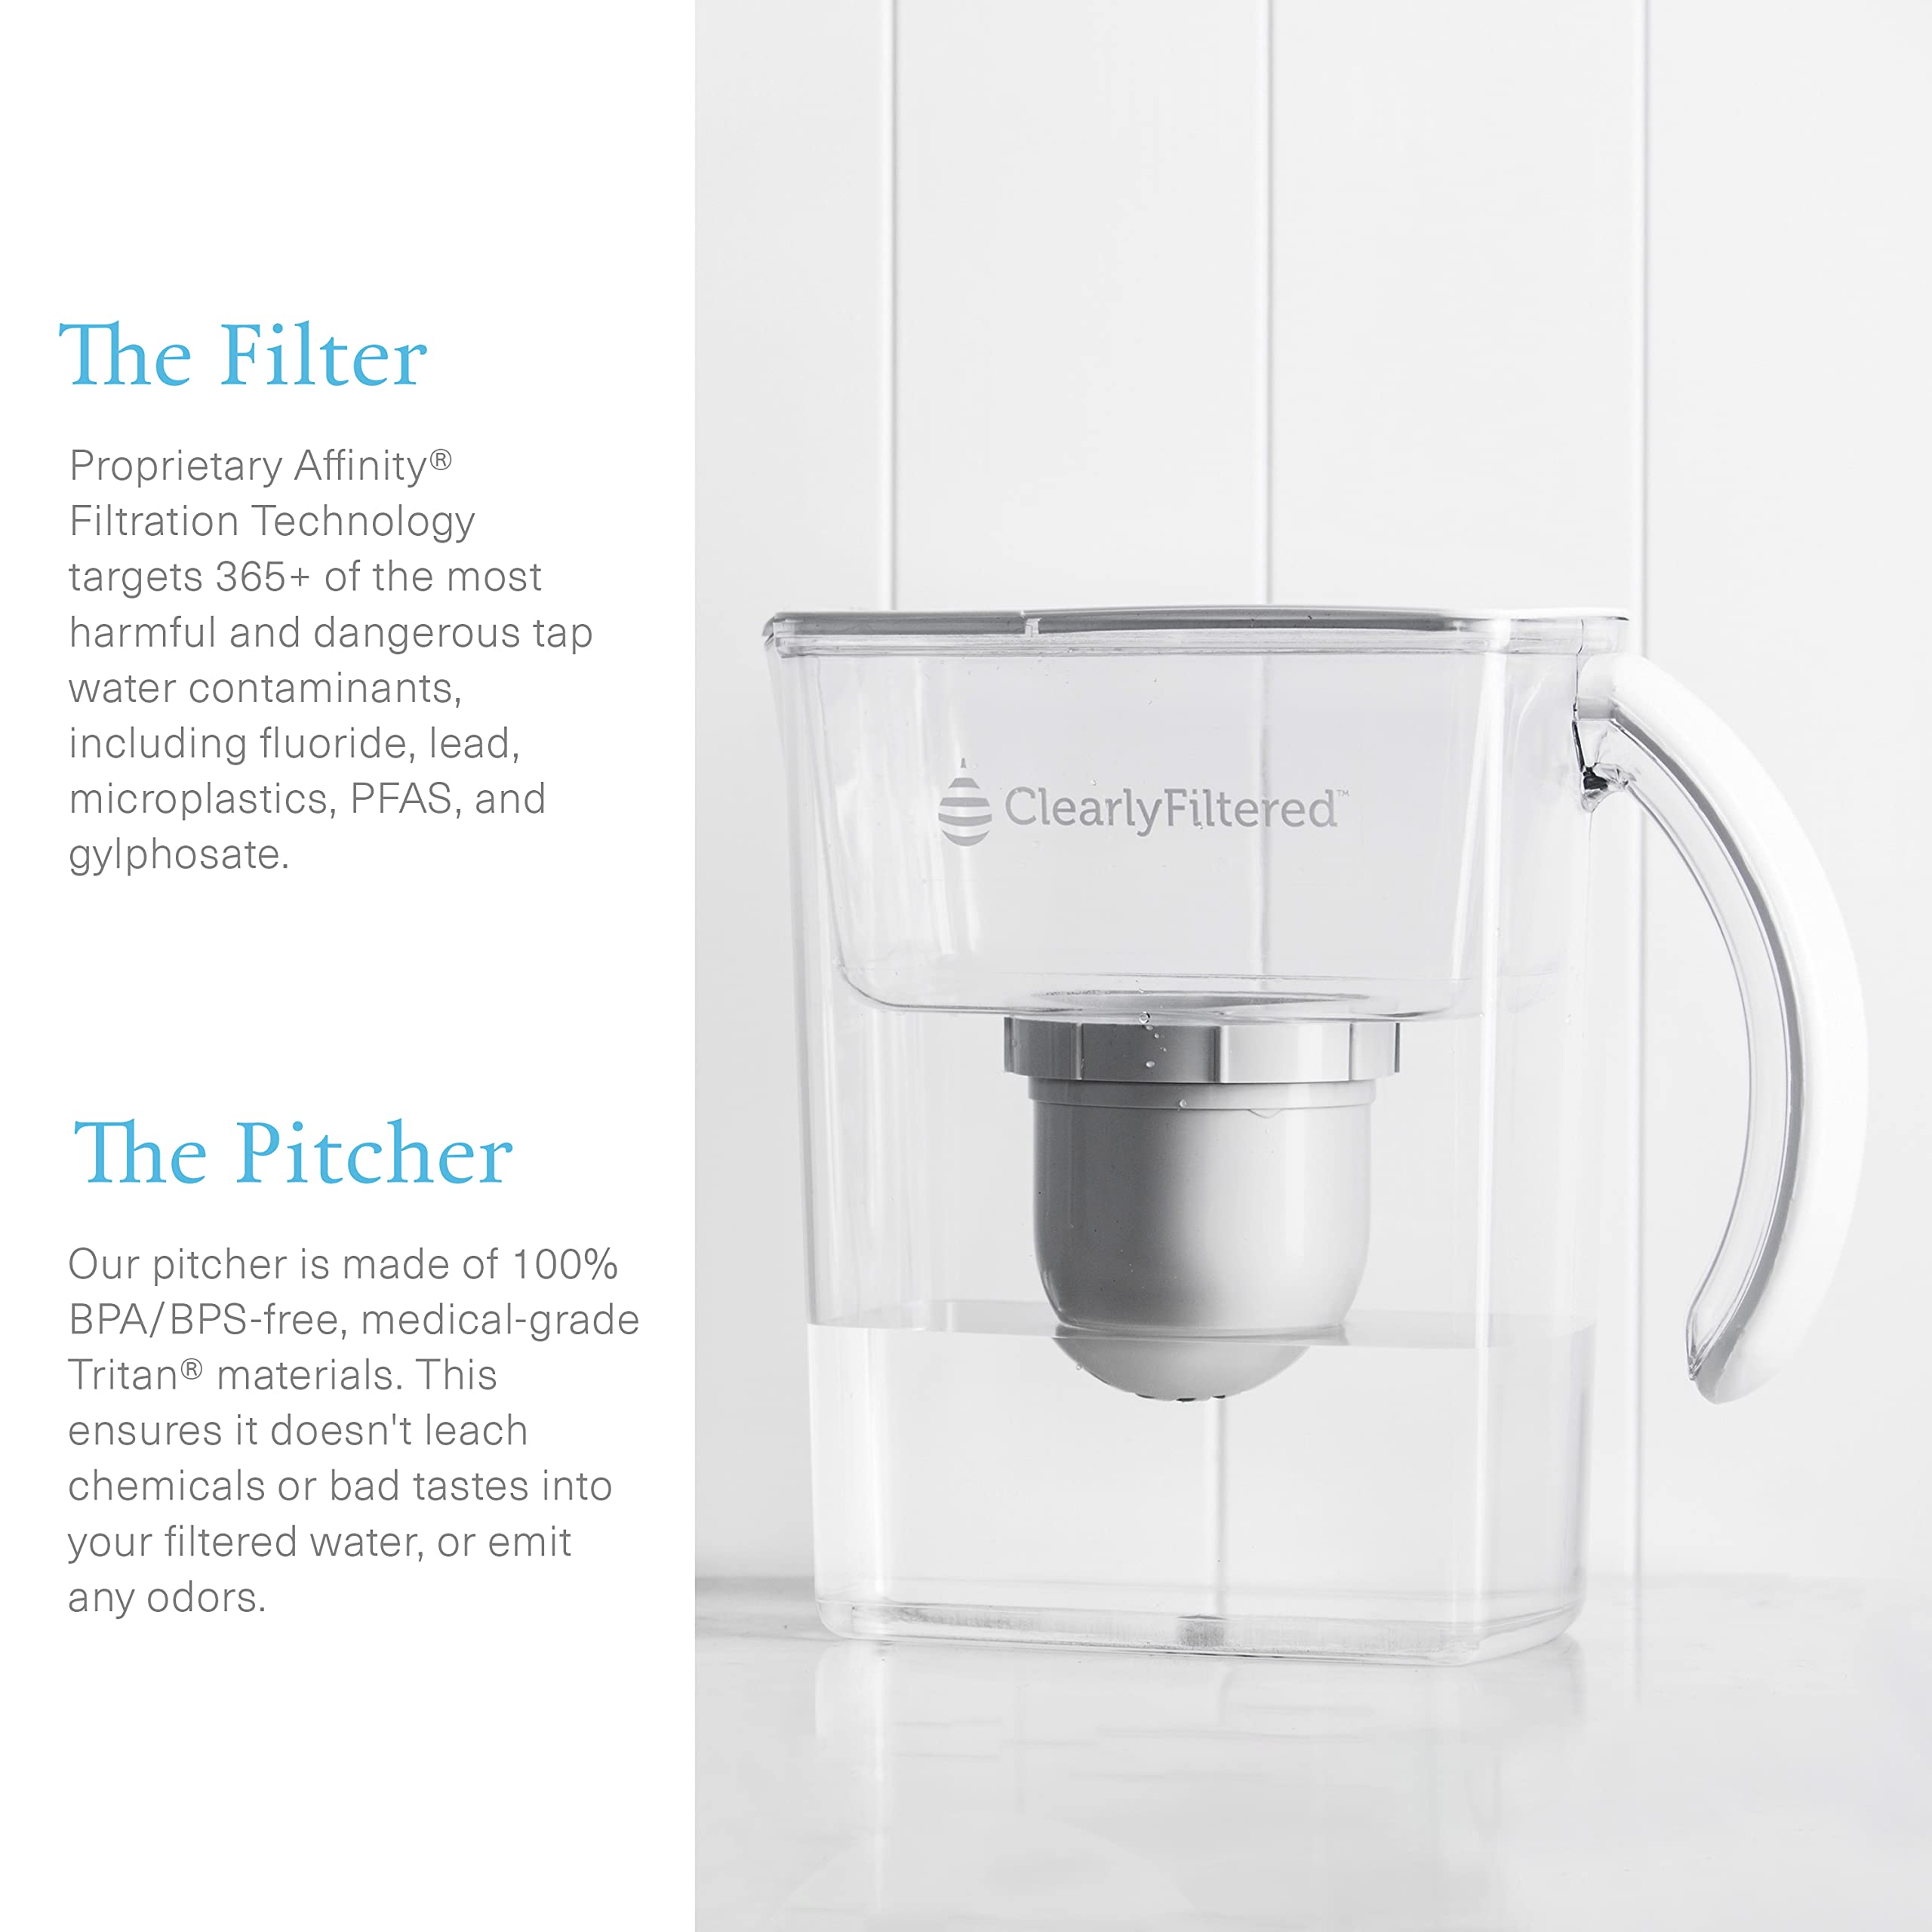 Clearly Filtered No. 1 Filtered Water Pitcher for Fluoride/Water Filter Pitcher + 6 Replacement Filters, BPA/BPS-Free/Filters 365+ Contaminants Including Fluoride, Lead, BPA, PFOA